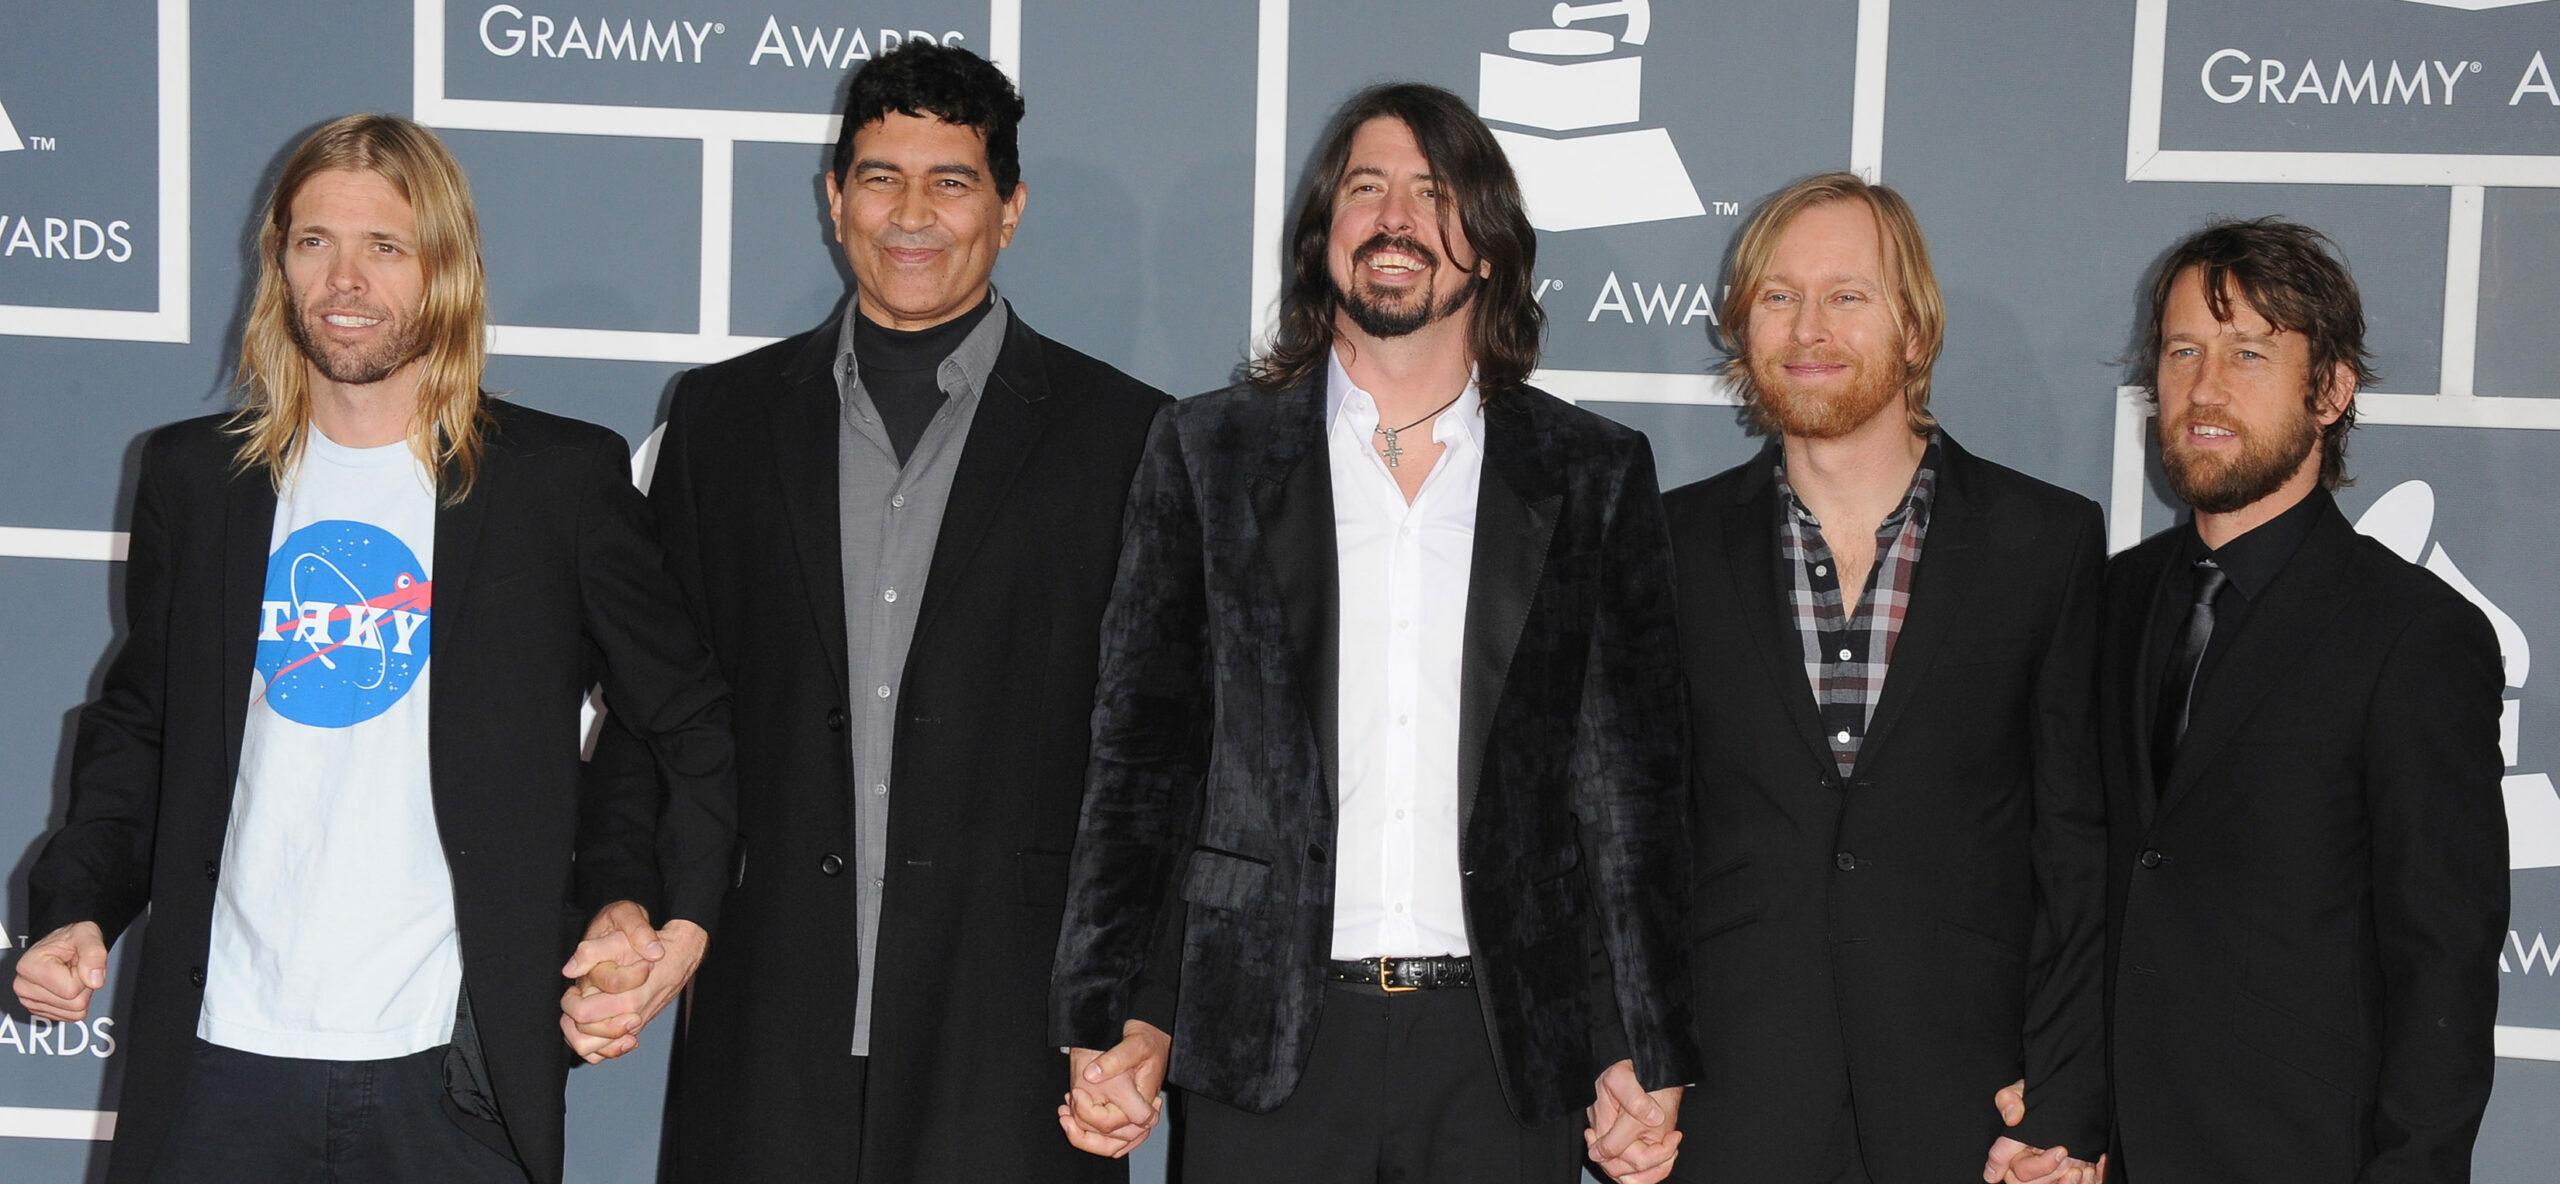 Foo Fighters Taylor Hawkins dead, fans feel most for Dave Grohl